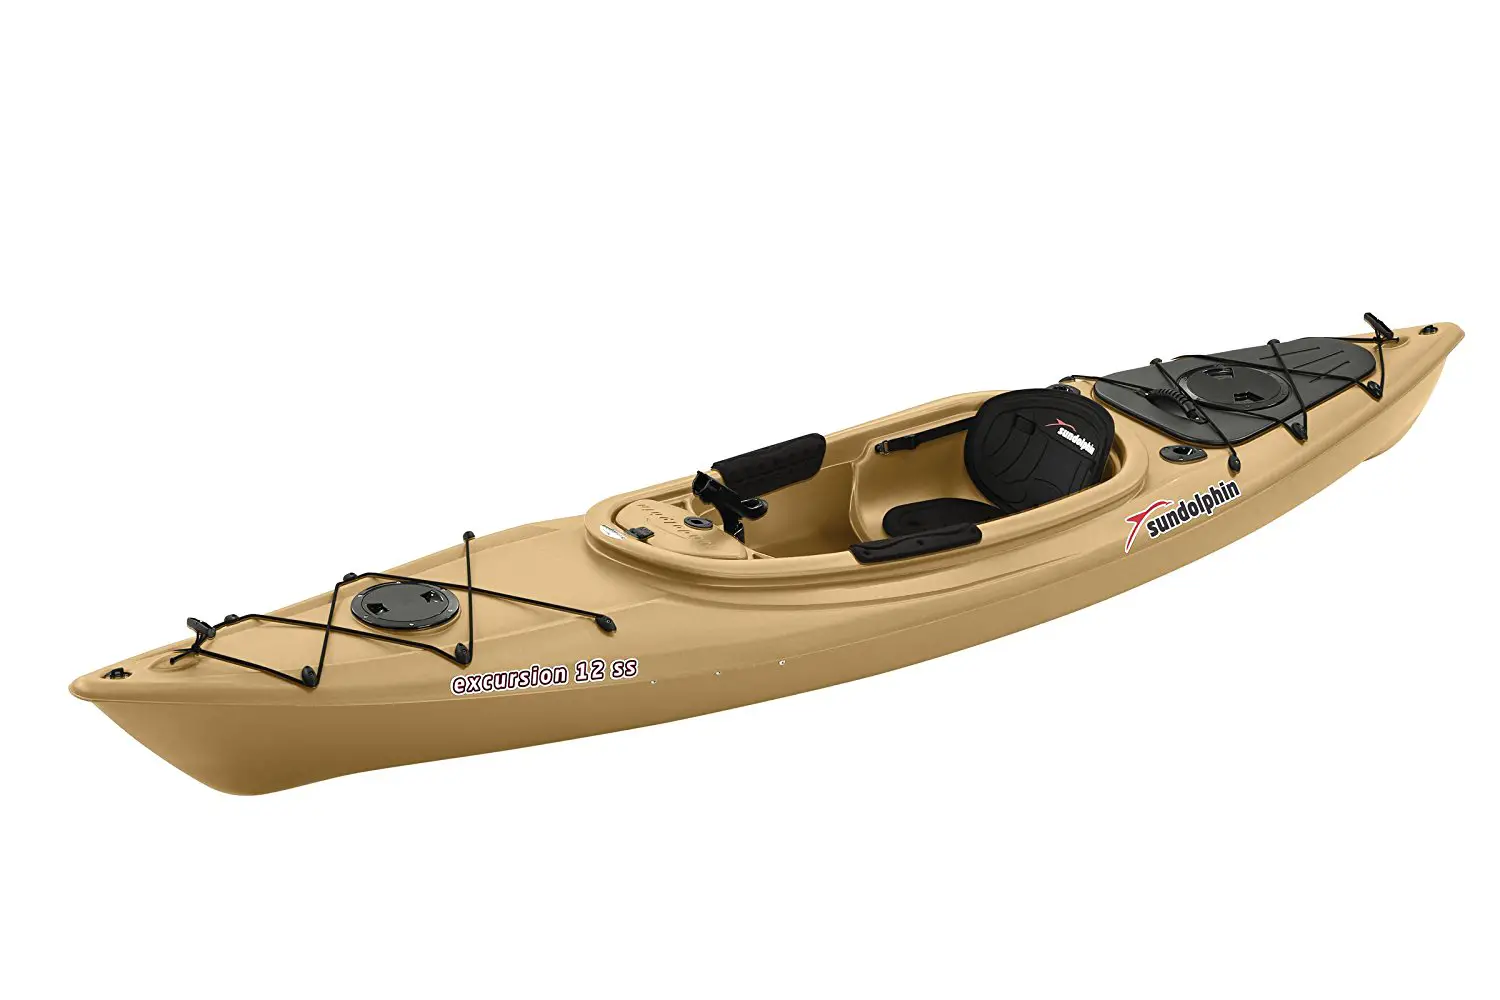 Sun Dolphin Excursion 12 foot kayak: A reliable review 1